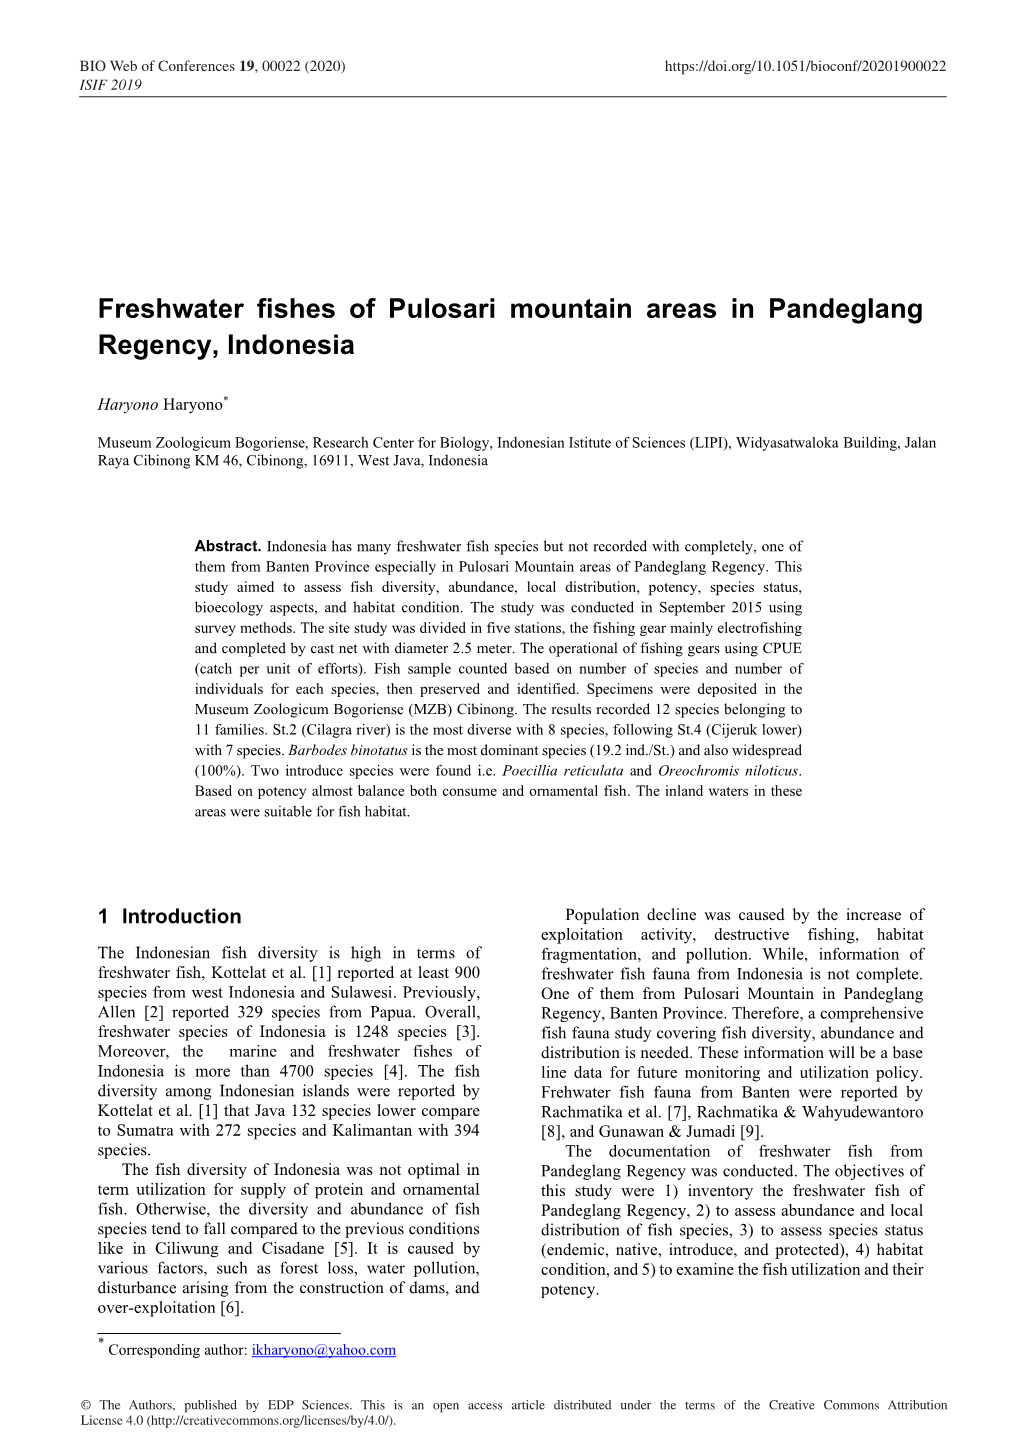 Freshwater Fishes of Pulosari Mountain Areas in Pandeglang Regency, Indonesia